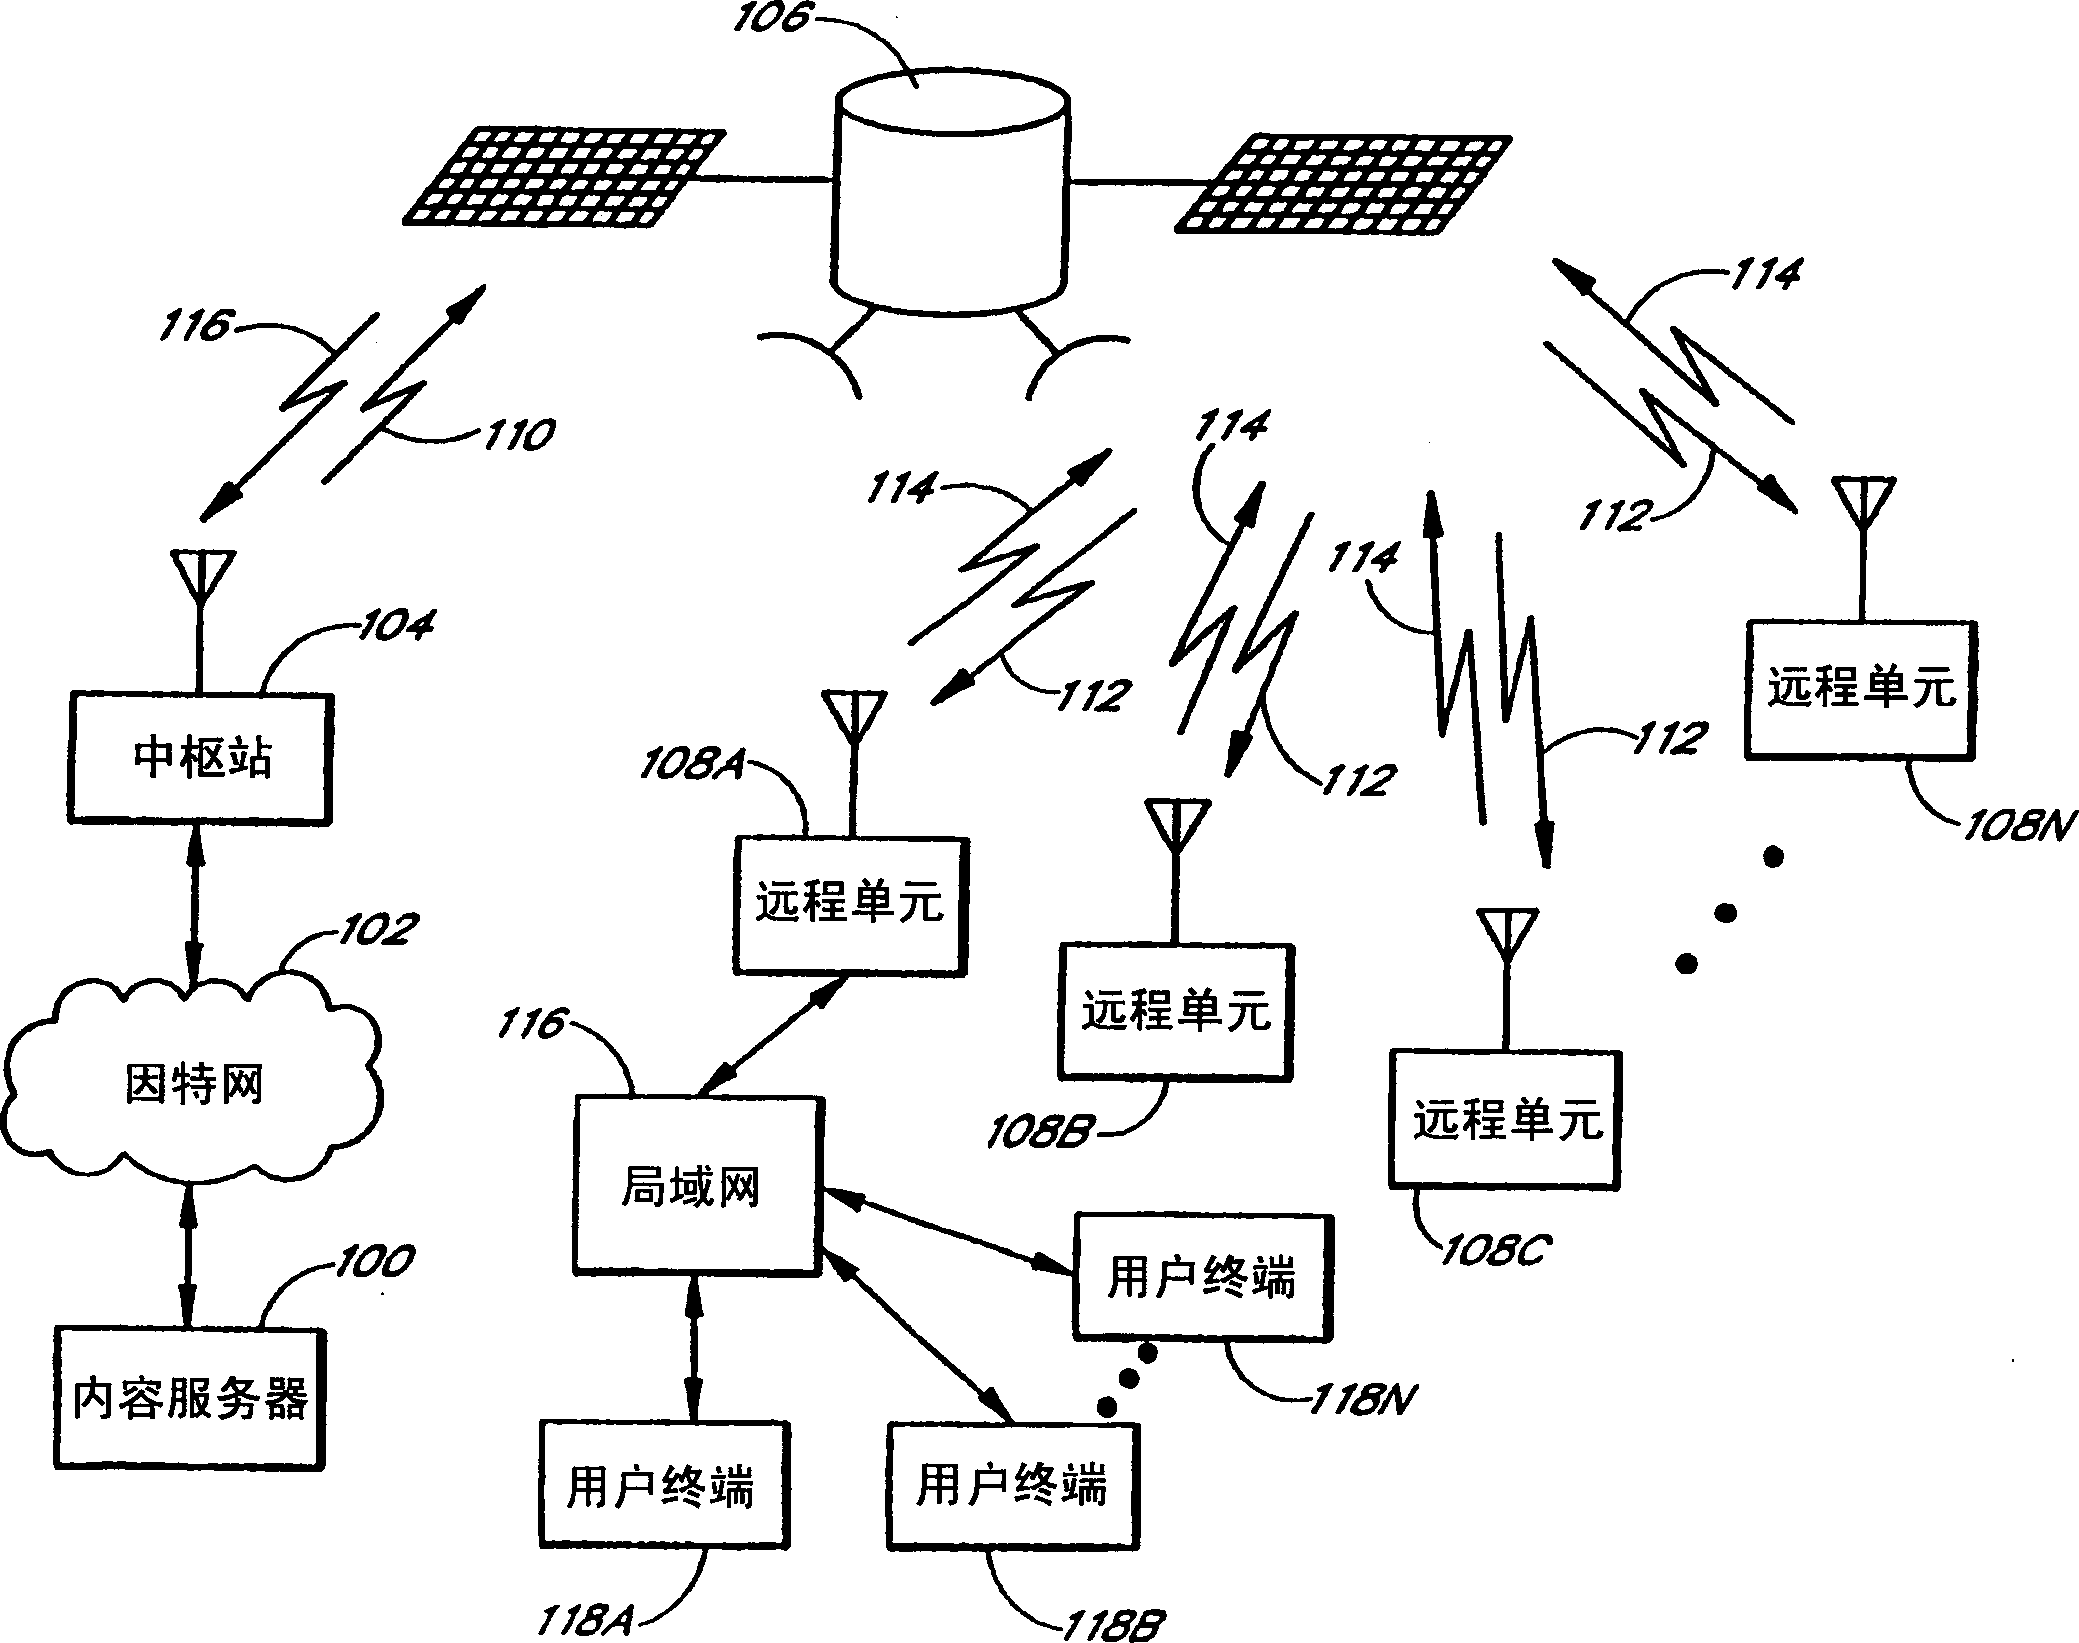 Timing synchronizaation and phase/frequency correction of QPSK signals